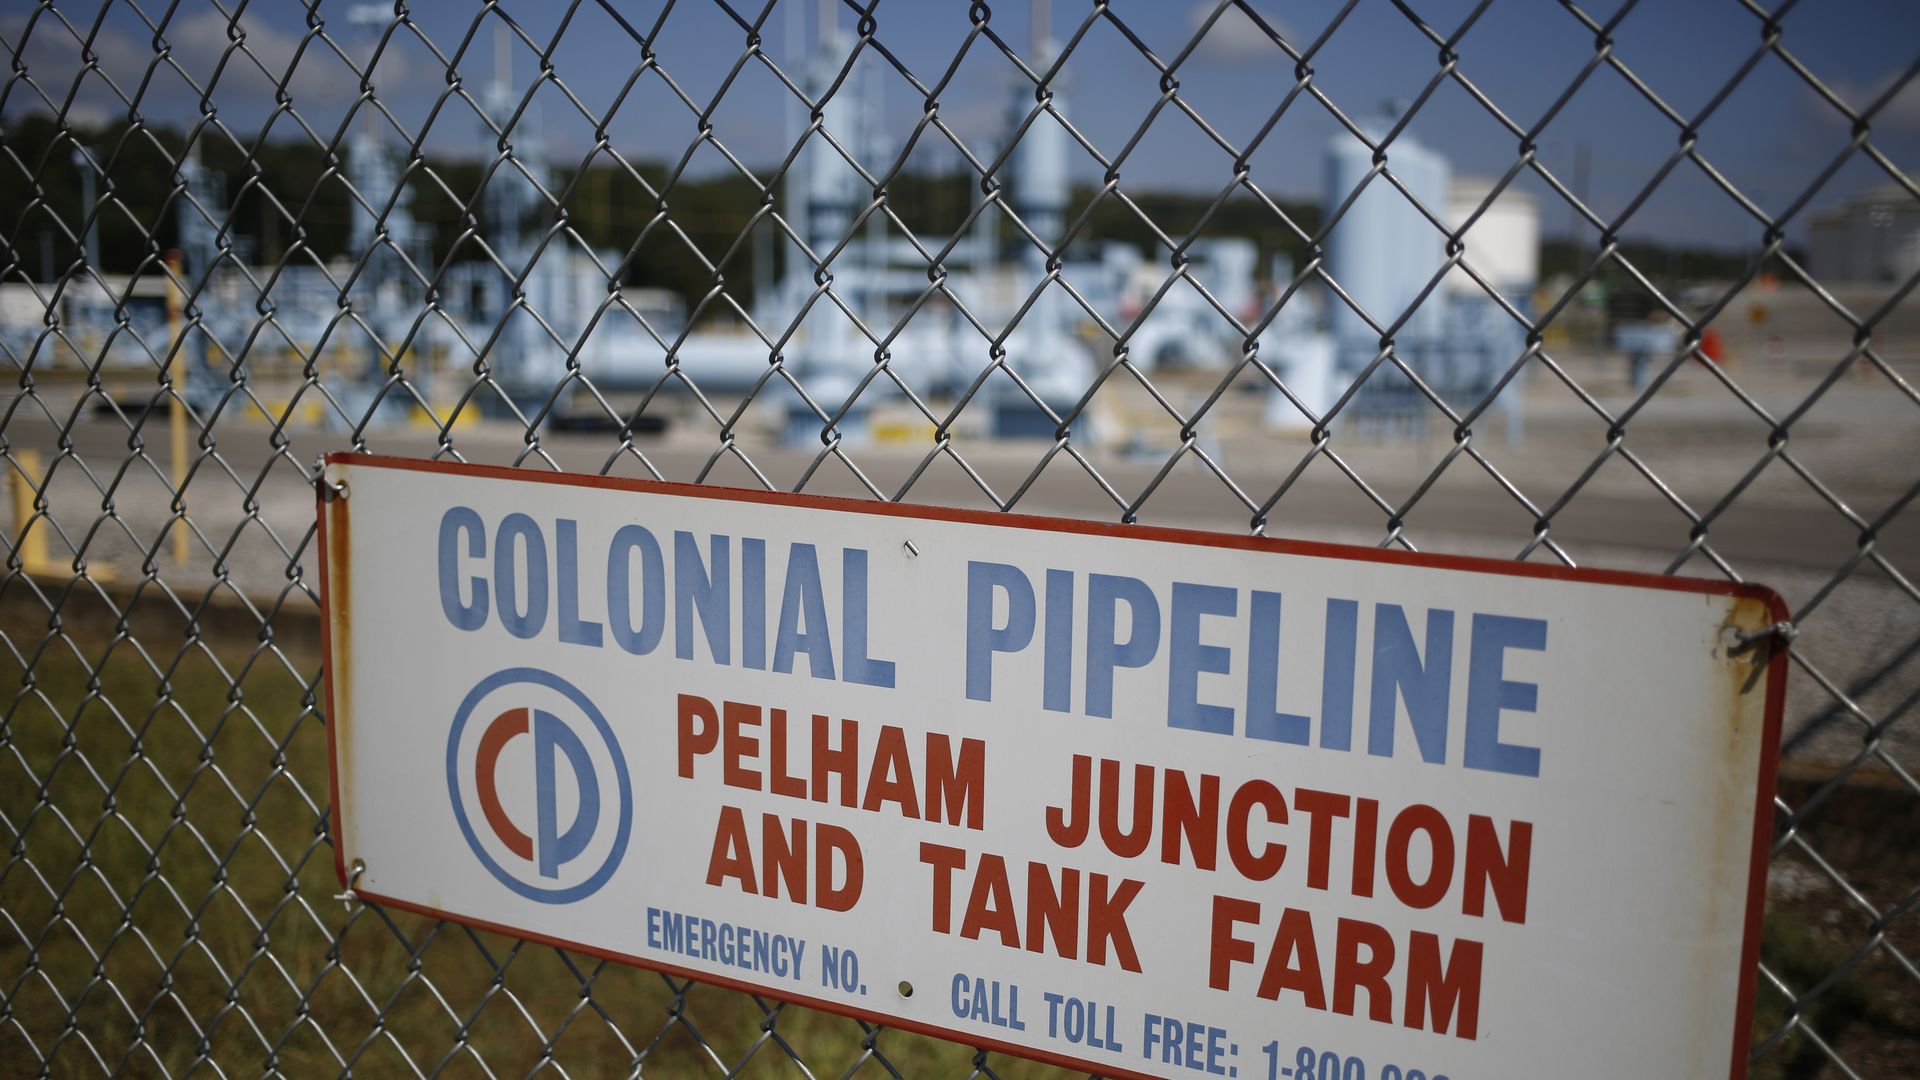 Signage is displayed on a fence at the Colonial Pipeline Co. Pelham junction and tank farm in Pelham, Alabama, U.S., on Monday, Sept. 19, 2016. 